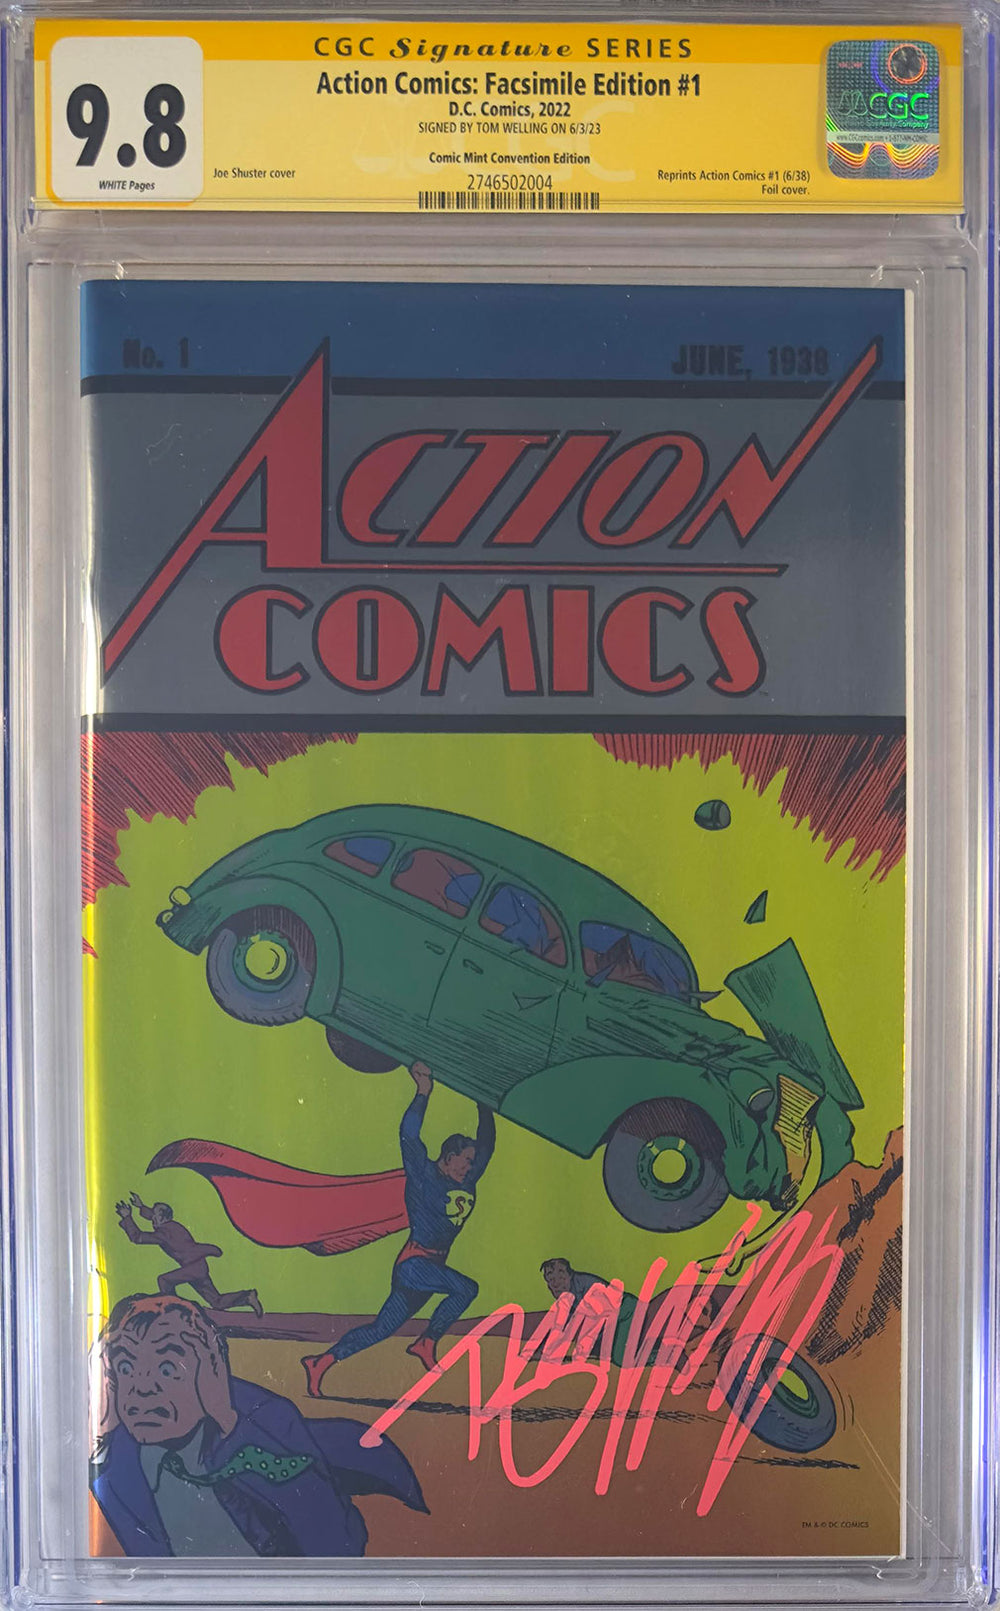 Action Comics #1 Foil Facsimile CGC SS 9.8 Signed by Tom Welling